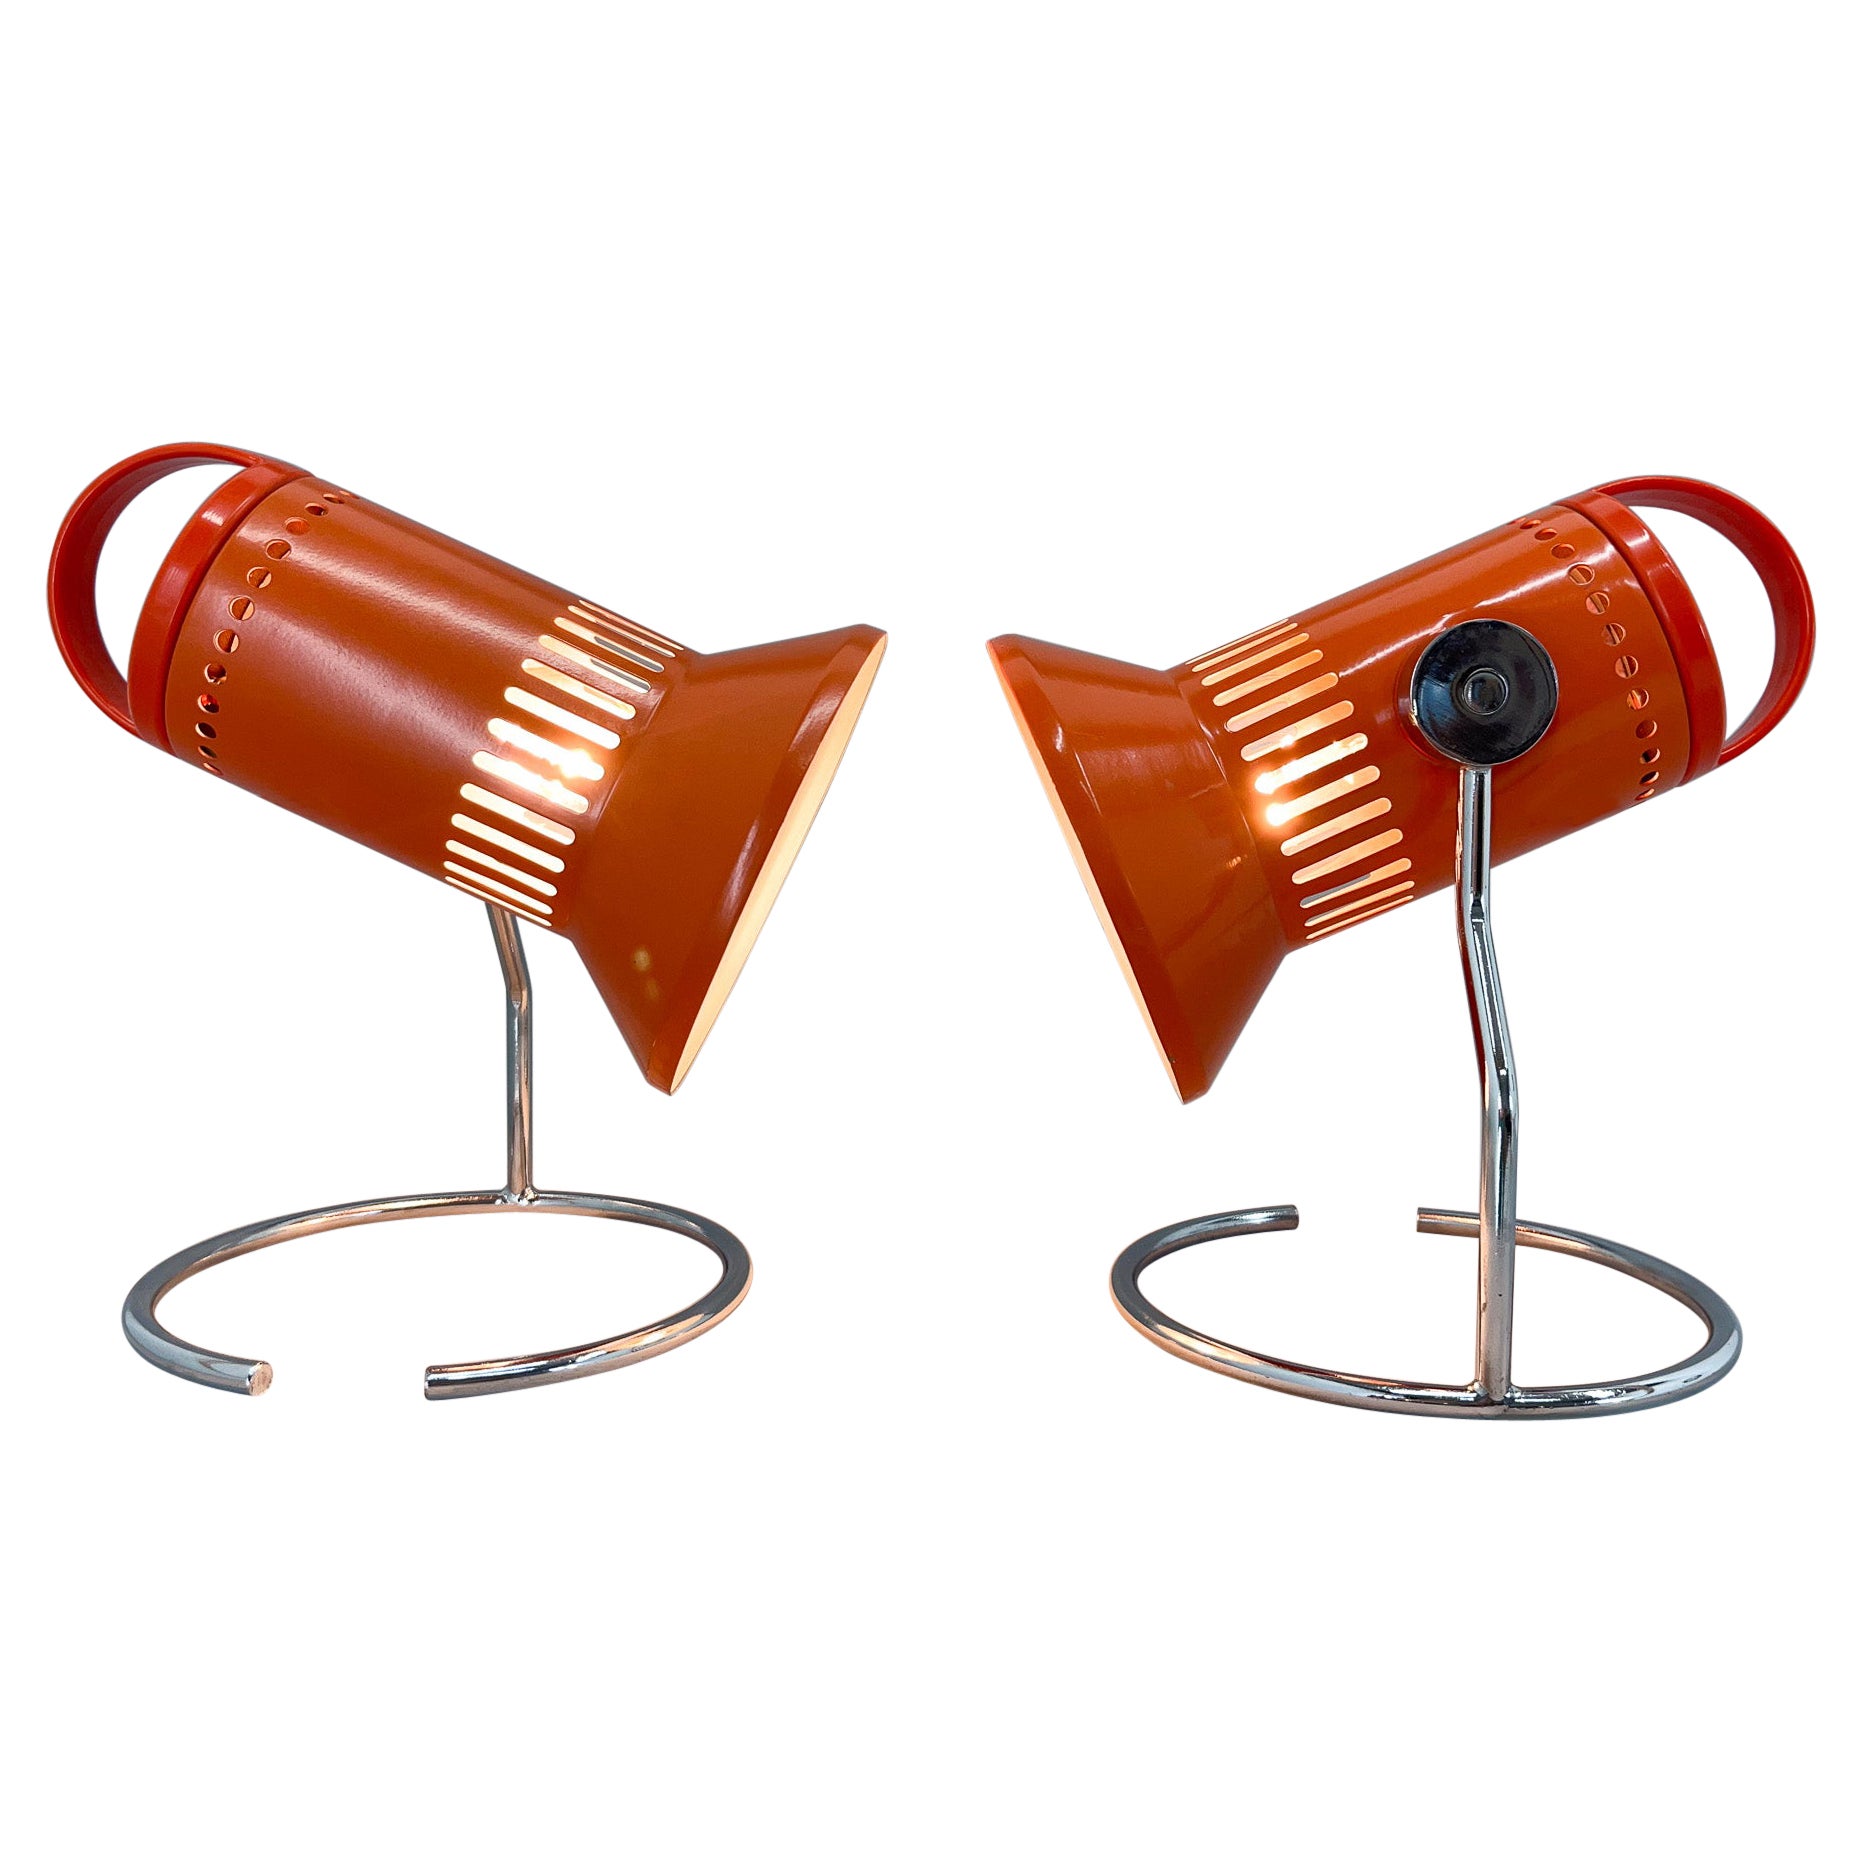 Set of Two Vintage Table Lamps from Chirana, 1970's For Sale